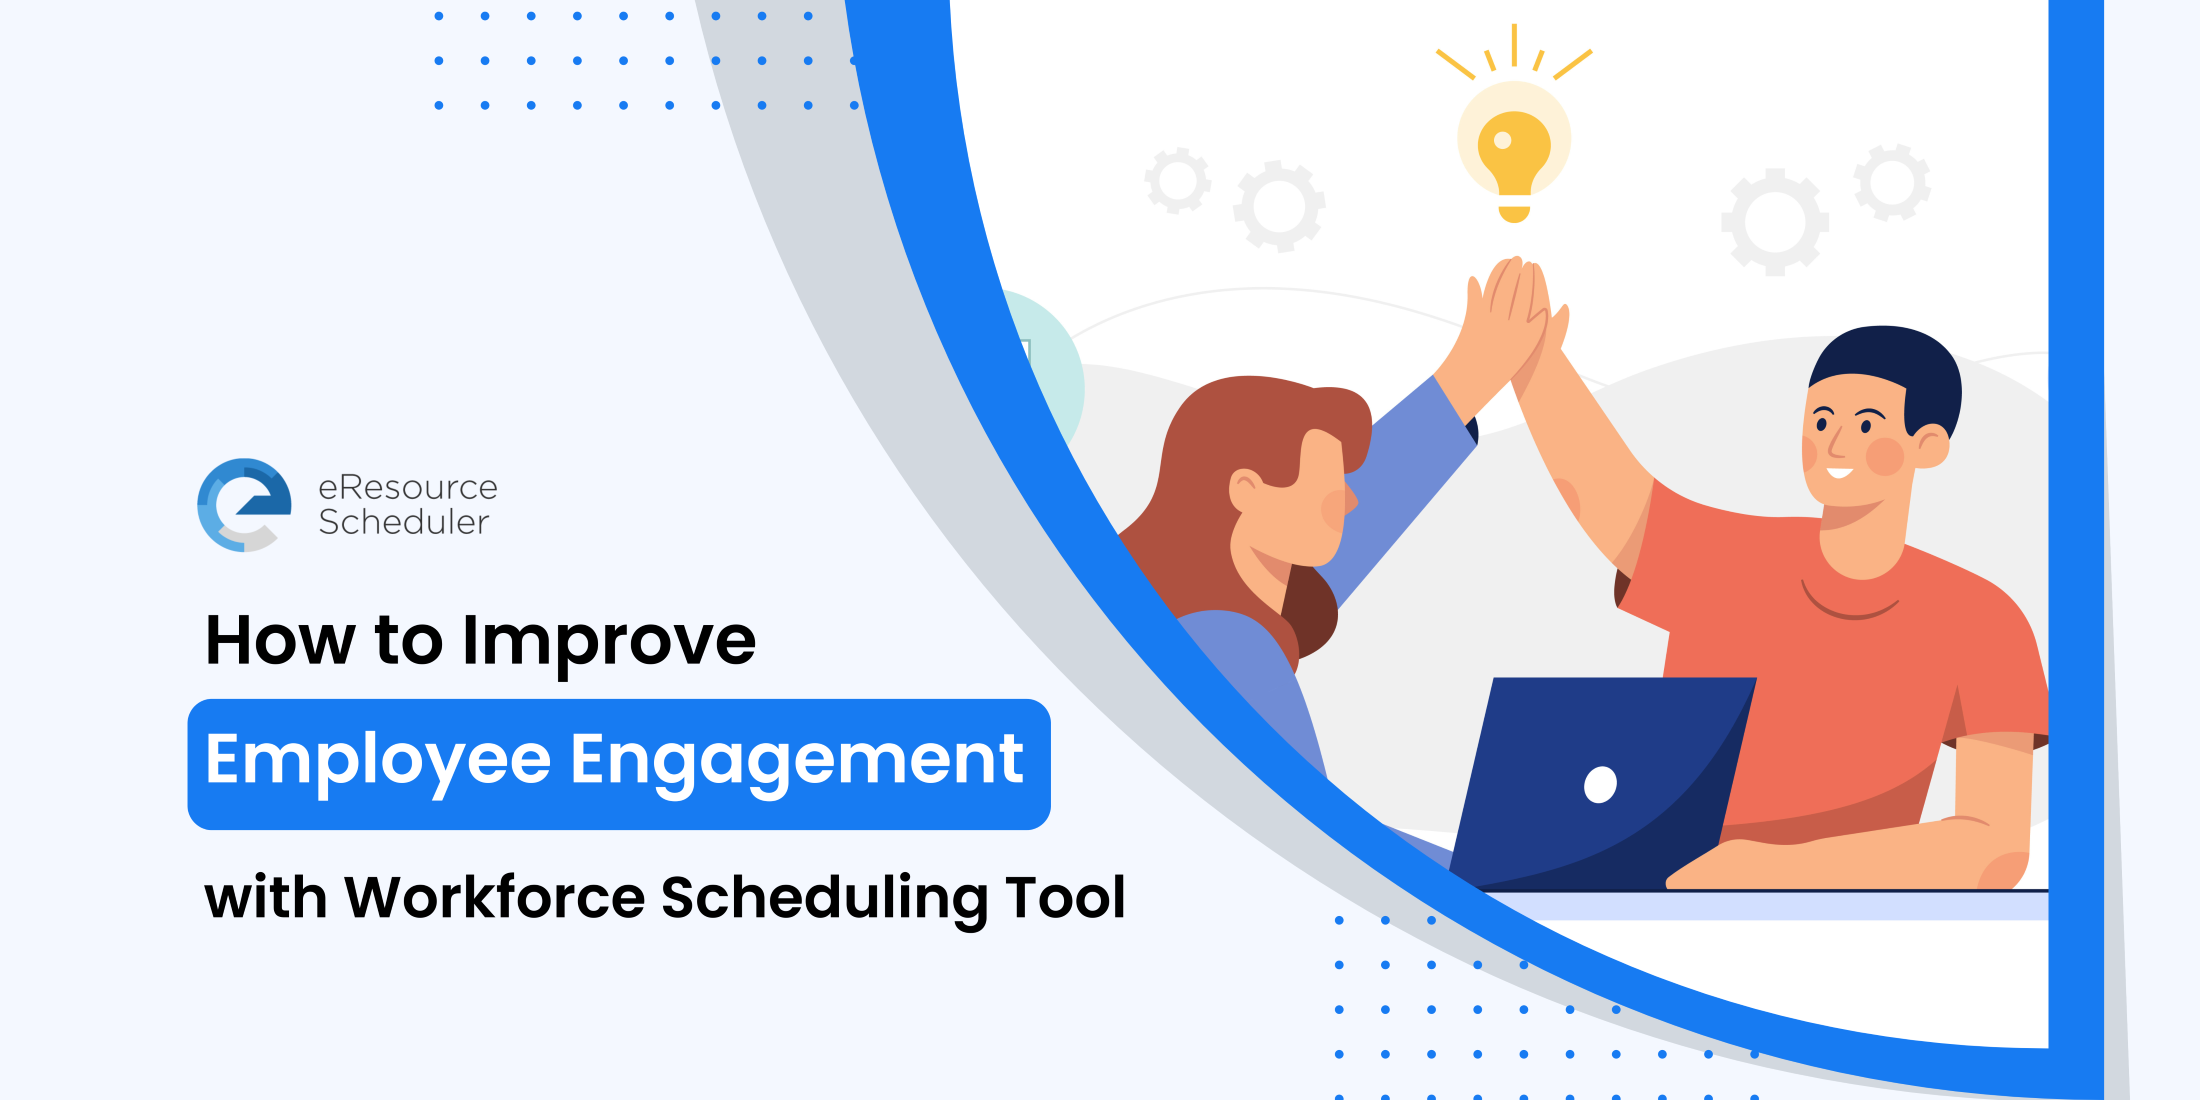 Workforce Scheduling Tool Improves Employee Engagement